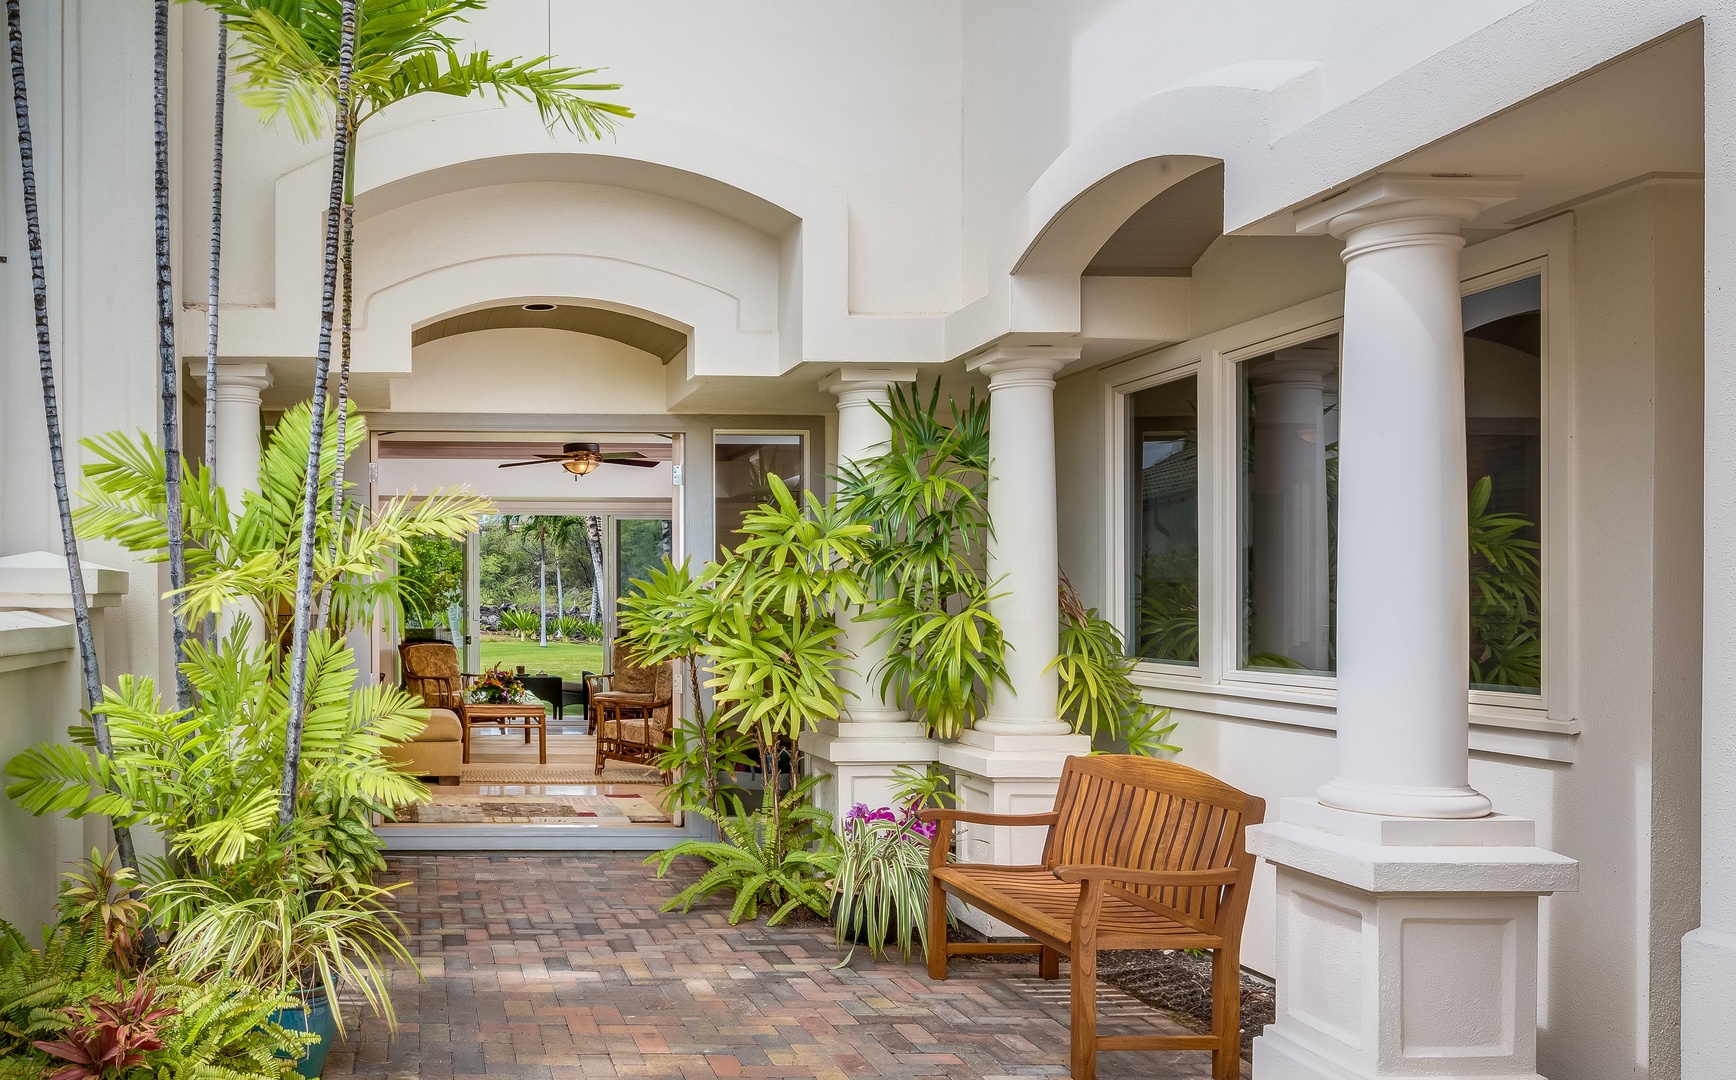 Kamuela Vacation Rentals, The Islands D3 - Beautiful Courtyard Leads Into Living Room and Out Into Gardens